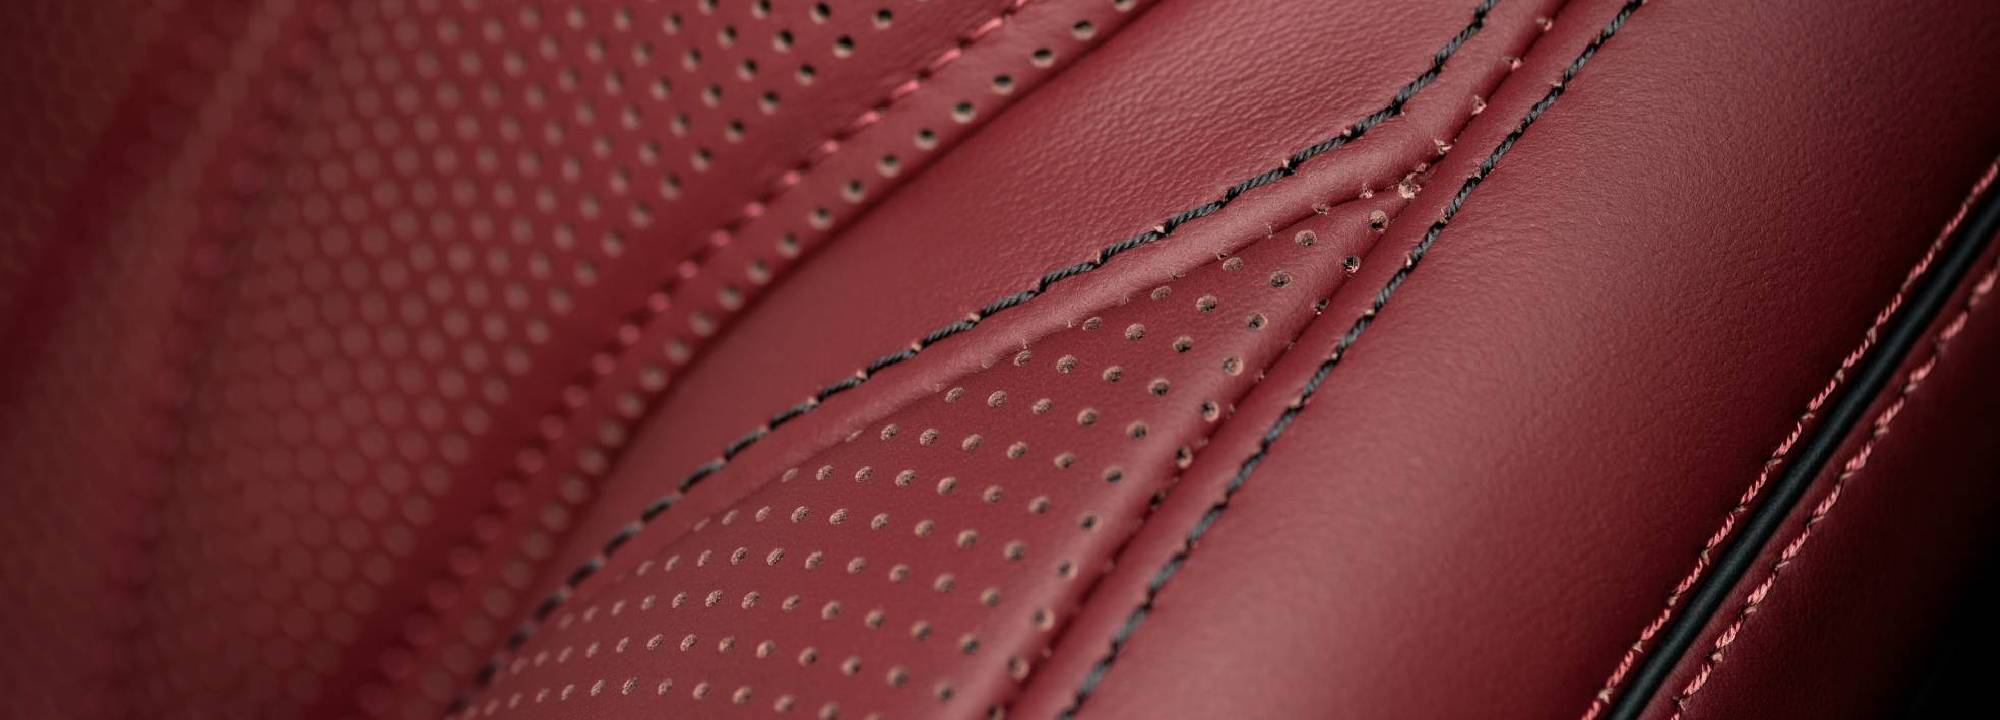 Get the Leather Seat at the Right Price for the Comfort of Your Vehicle